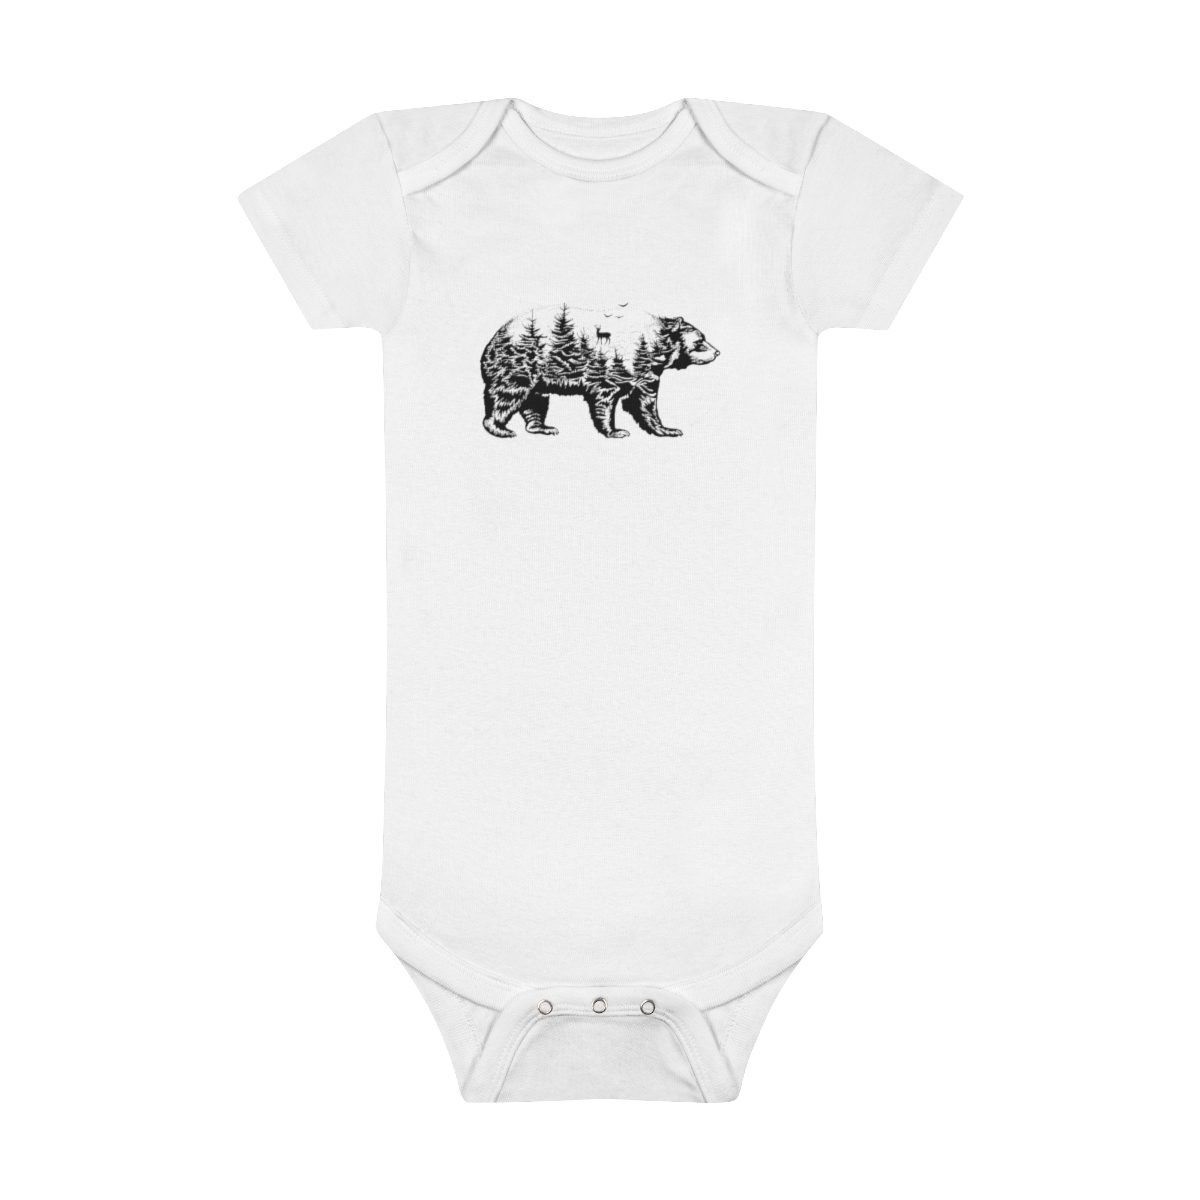 Adorable Black and White Forest Baby Onesie® for Your Little Adventurer - $22.66